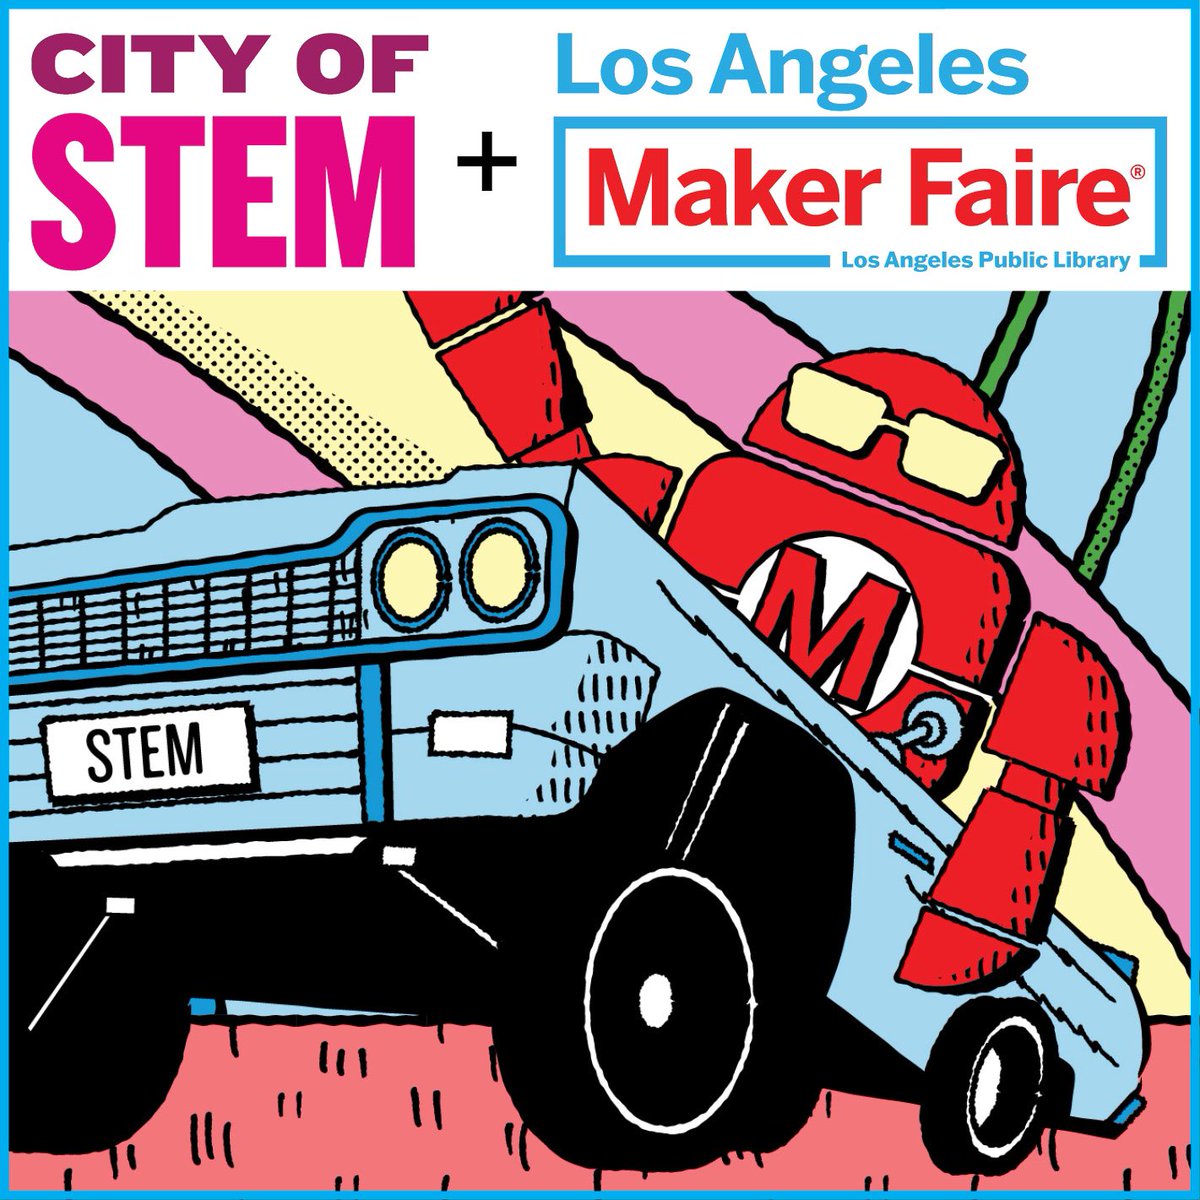 Celebrate science, creativity, invention and fun at the 2nd annual Los Angeles Maker Faire + City of STEM, which will be held at the LA State Historic Park on Sat., April 6. The free event is sure to astonish and inspire science lovers of all ages. Info: losangeles.makerfaire.com